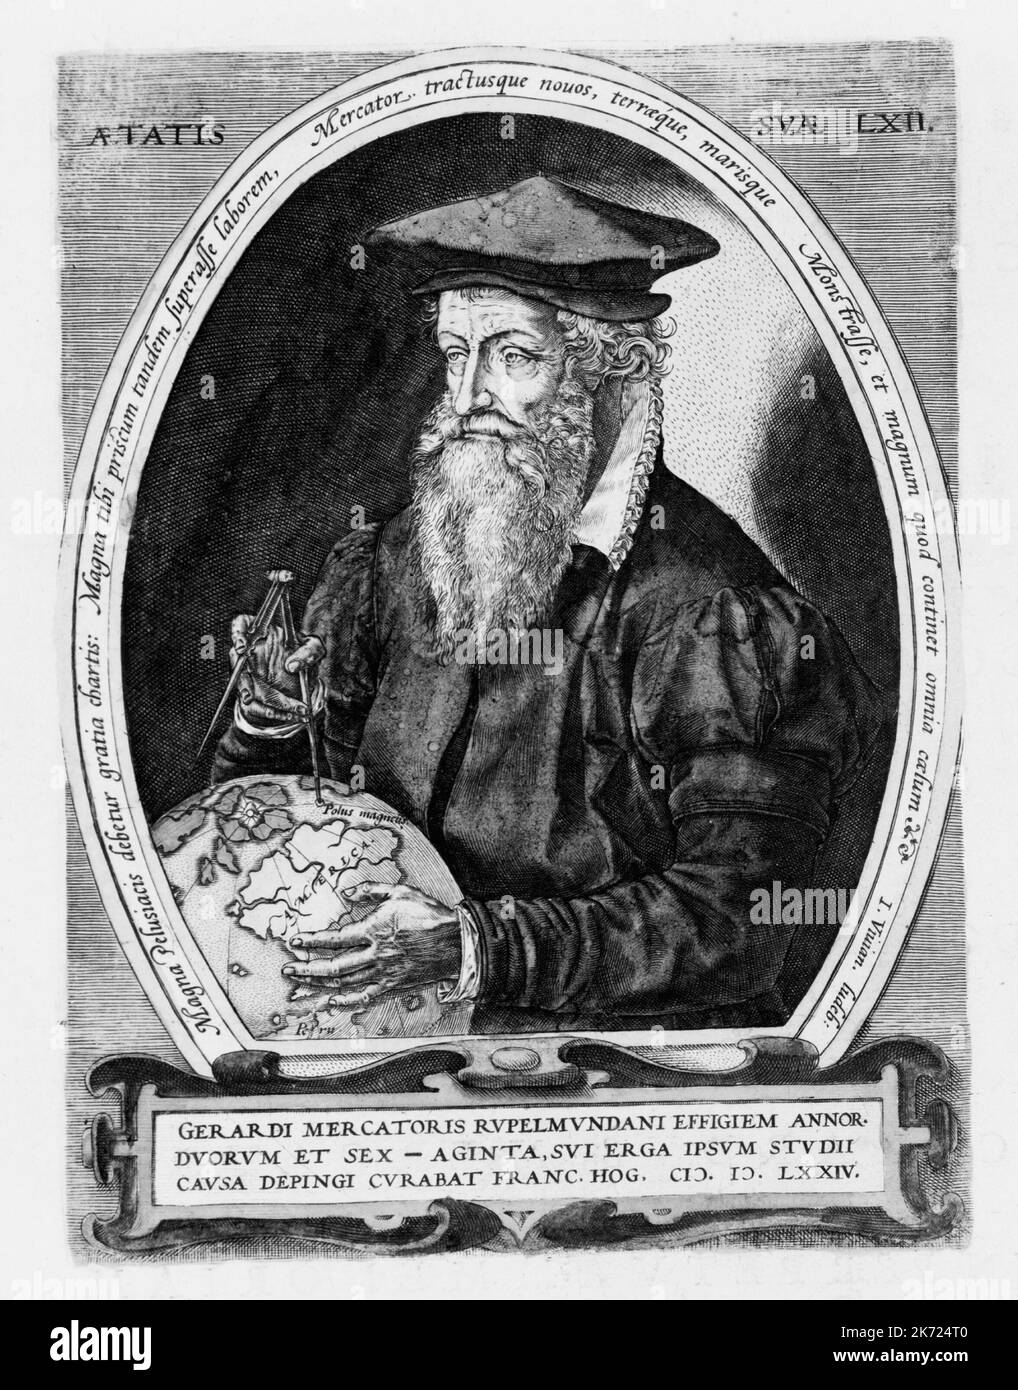 Portrait of Gerardus Mercator or Gerard Mercator (1512-1594), Flemish cartographer, pictured with globe and compass, ca. 1595 Stock Photo